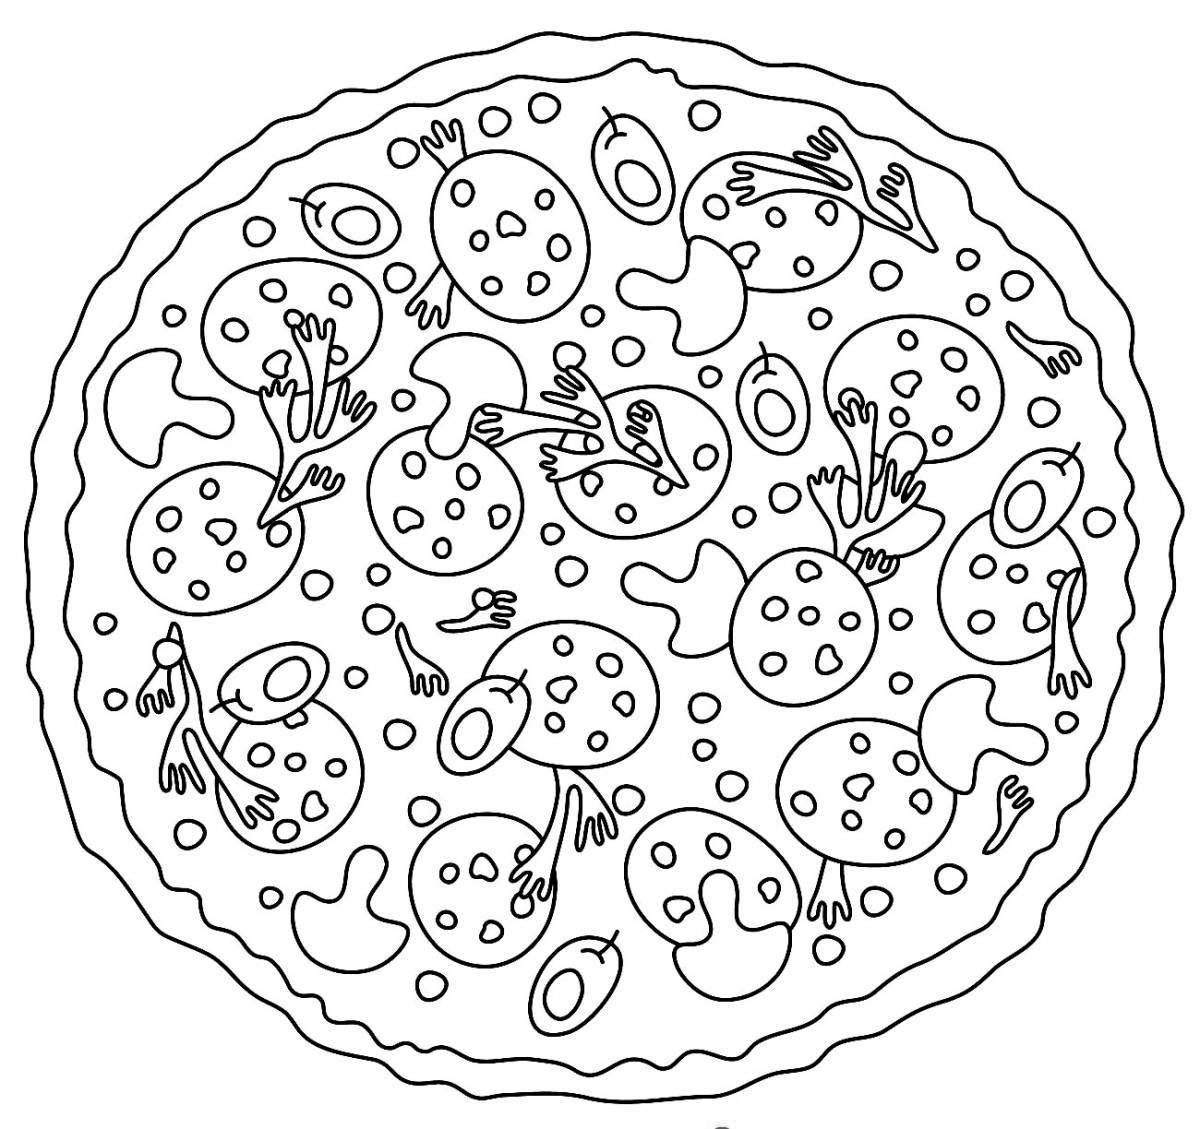 Bright sausage pizza coloring page